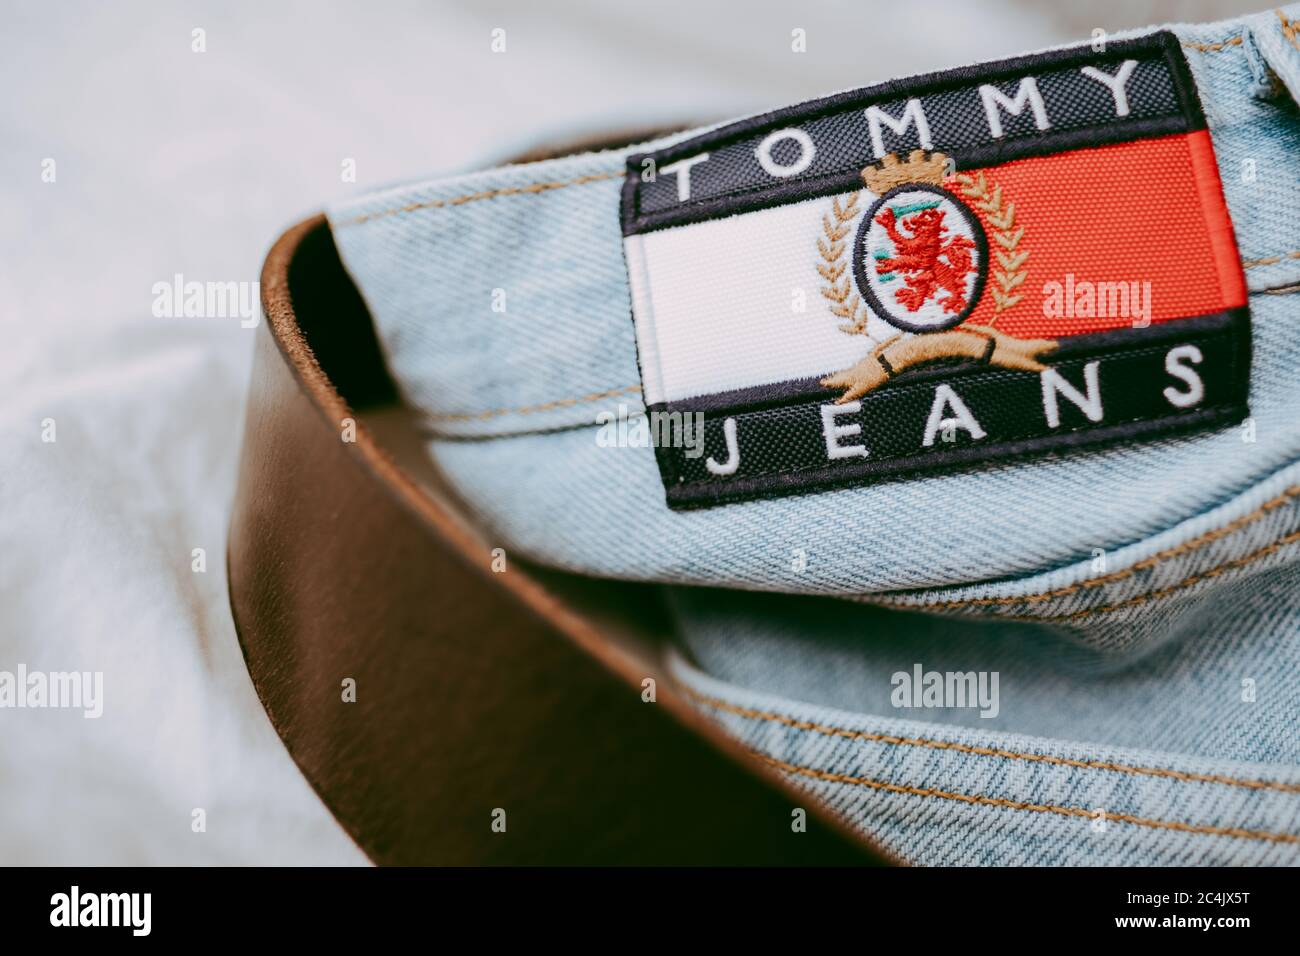 Closeup of Tommy Hilfiger label on blue jeans Stock Photo - Alamy